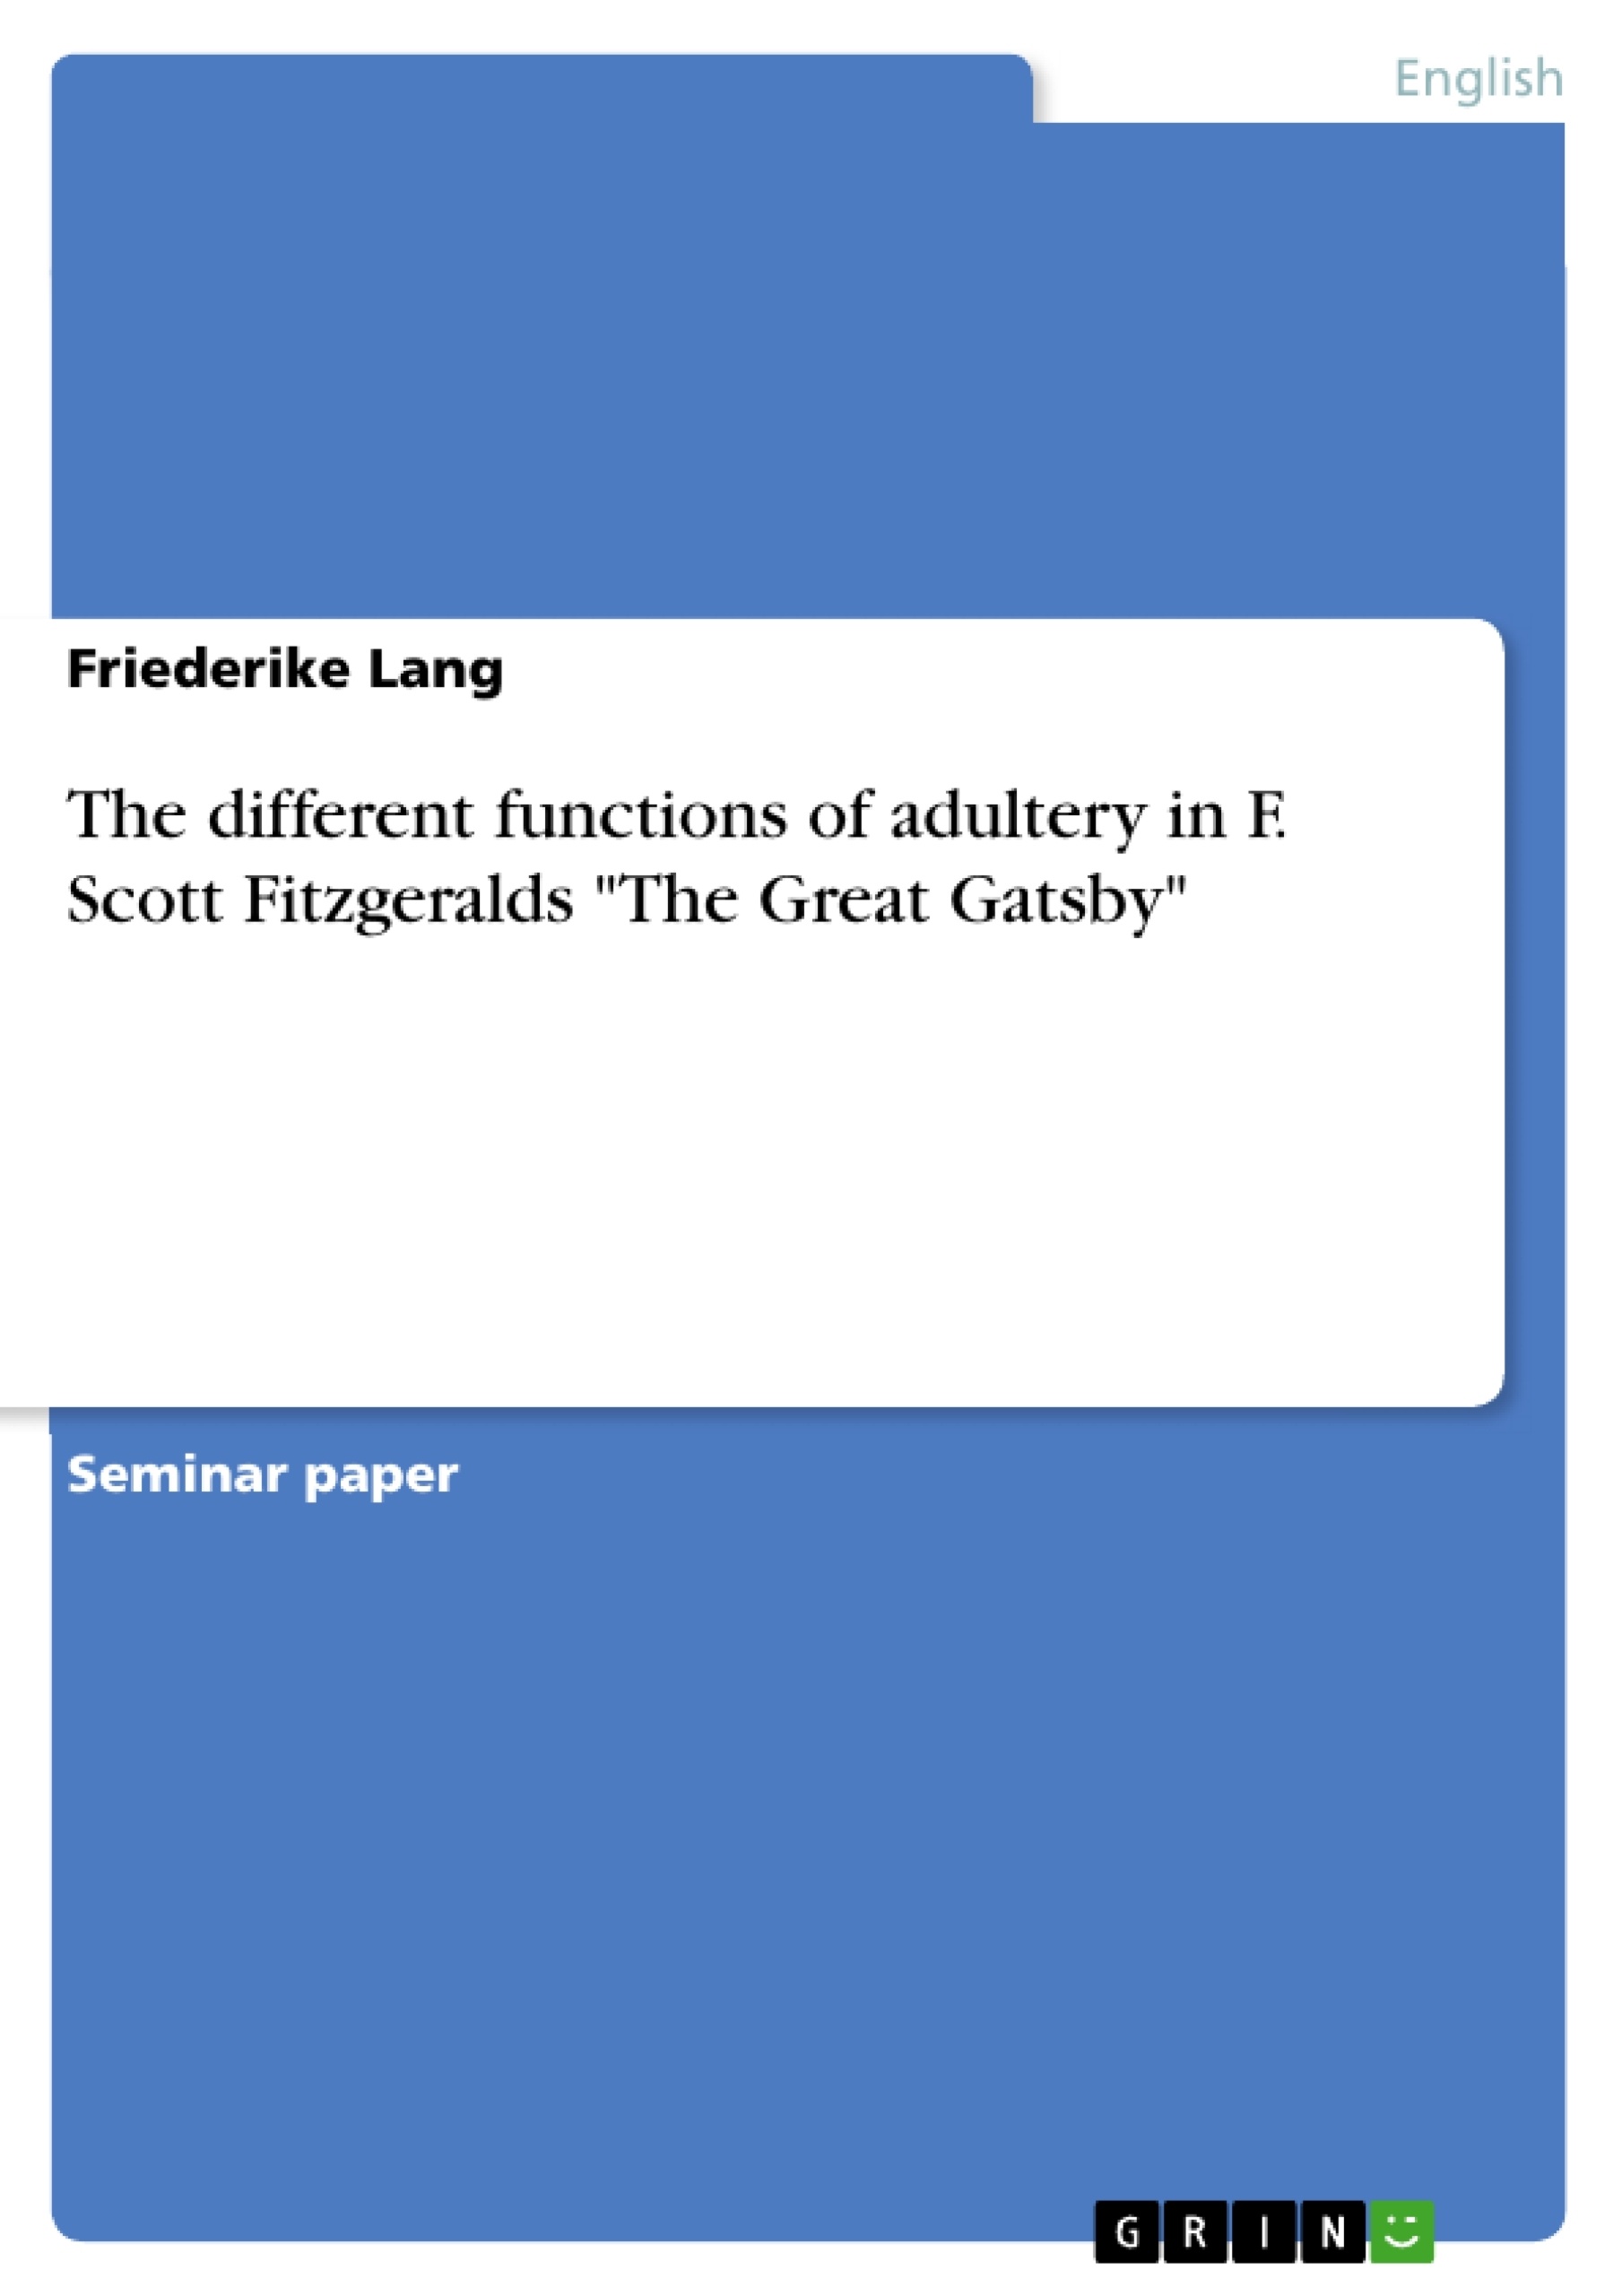 Title: The different functions of adultery in F. Scott Fitzgeralds "The Great Gatsby"